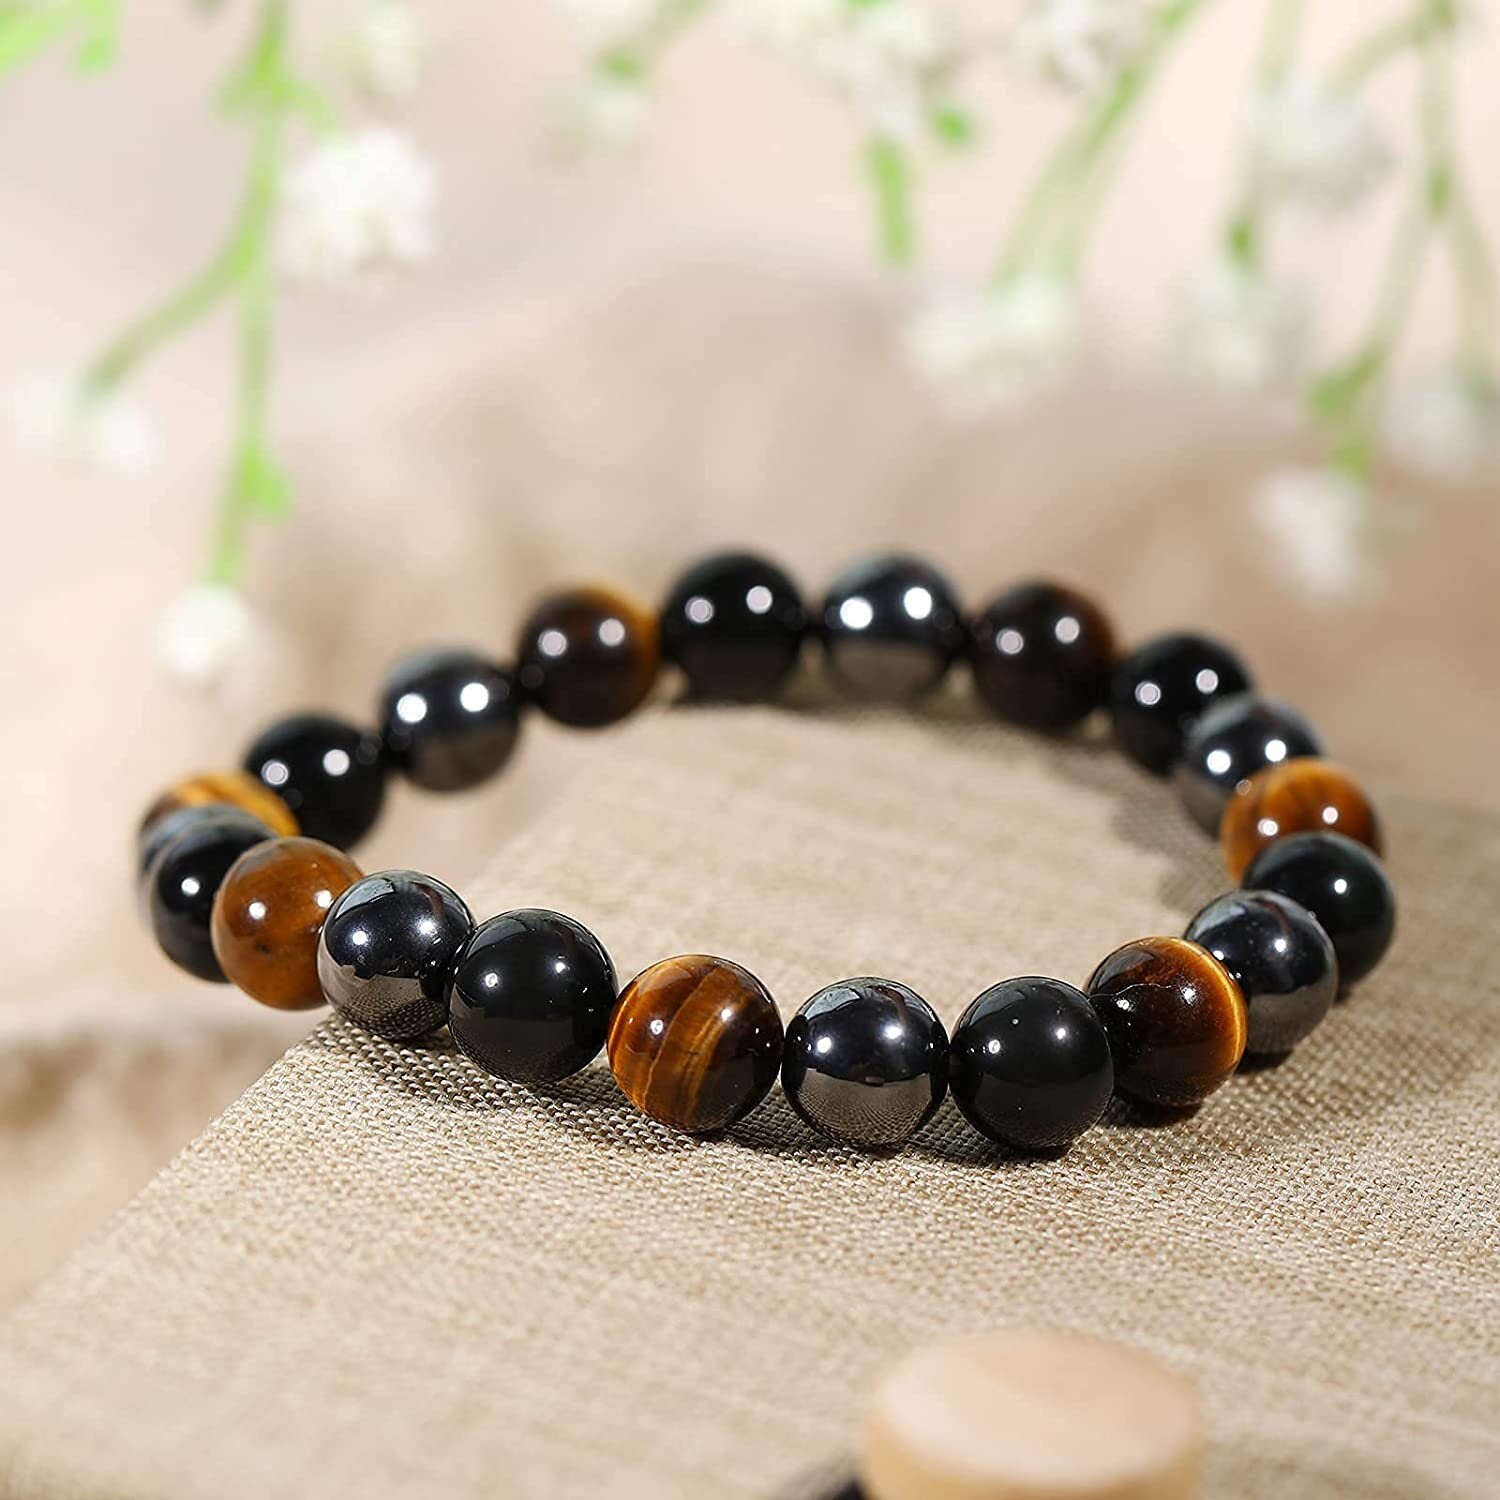 Beaded Bracelet 10mm Size For Men And Women – Bringer Of Good Luck Triple Protection Bracelet Happiness – Tiger Eye – Black Obsidian – Hematite By Neicoo – 7A Premium Natural Stones Protection 